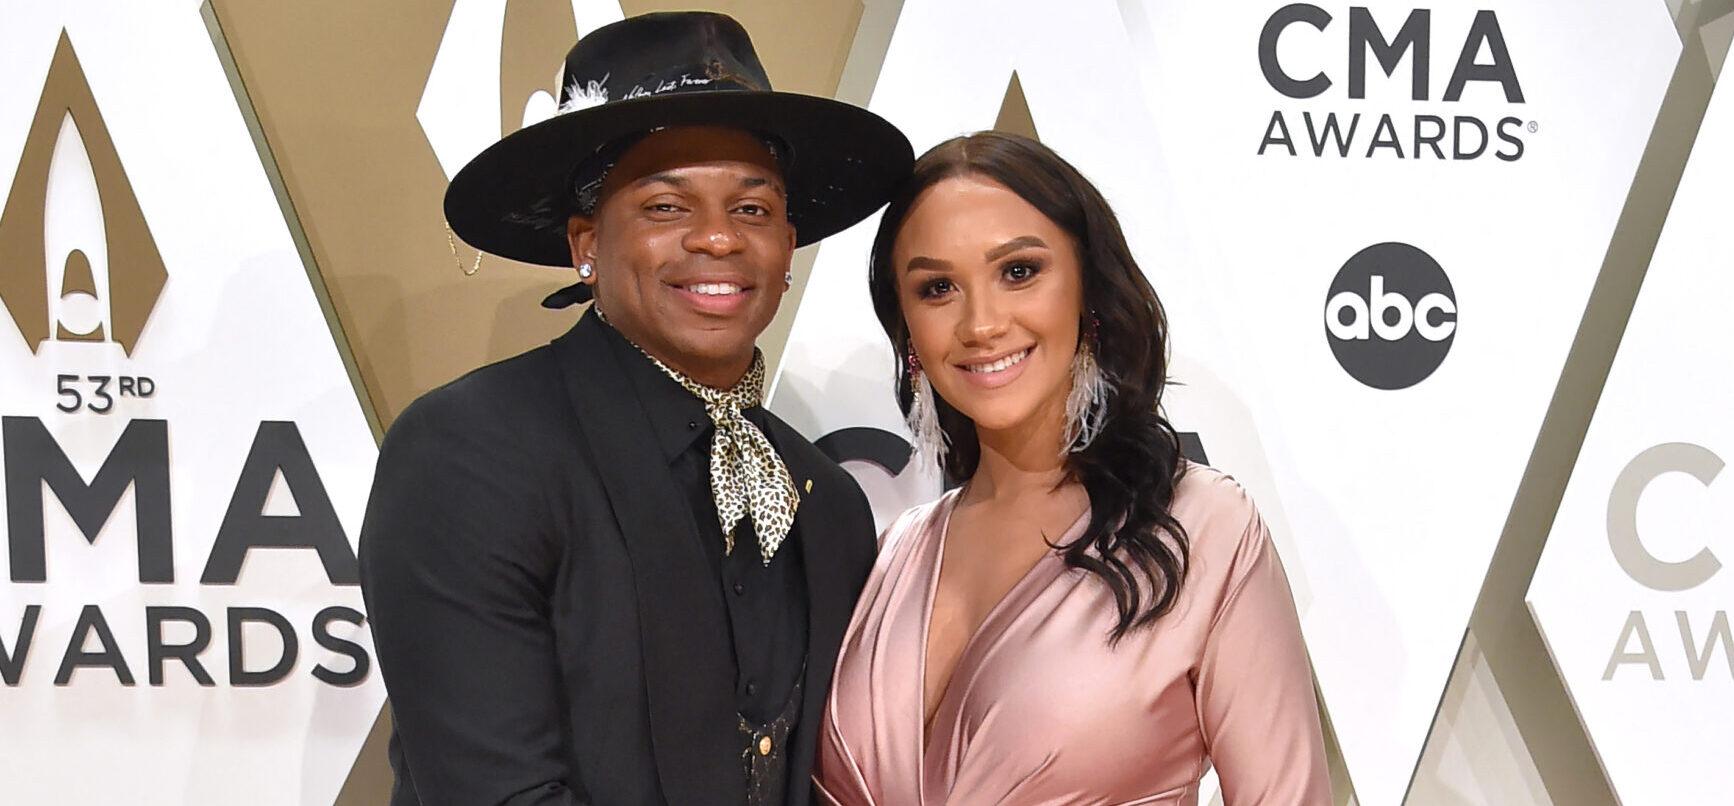 Country Star Jimmie Allen And Wife Alexis Gale Call It Quits On Their Marriage Amid Her Third Pregnancy